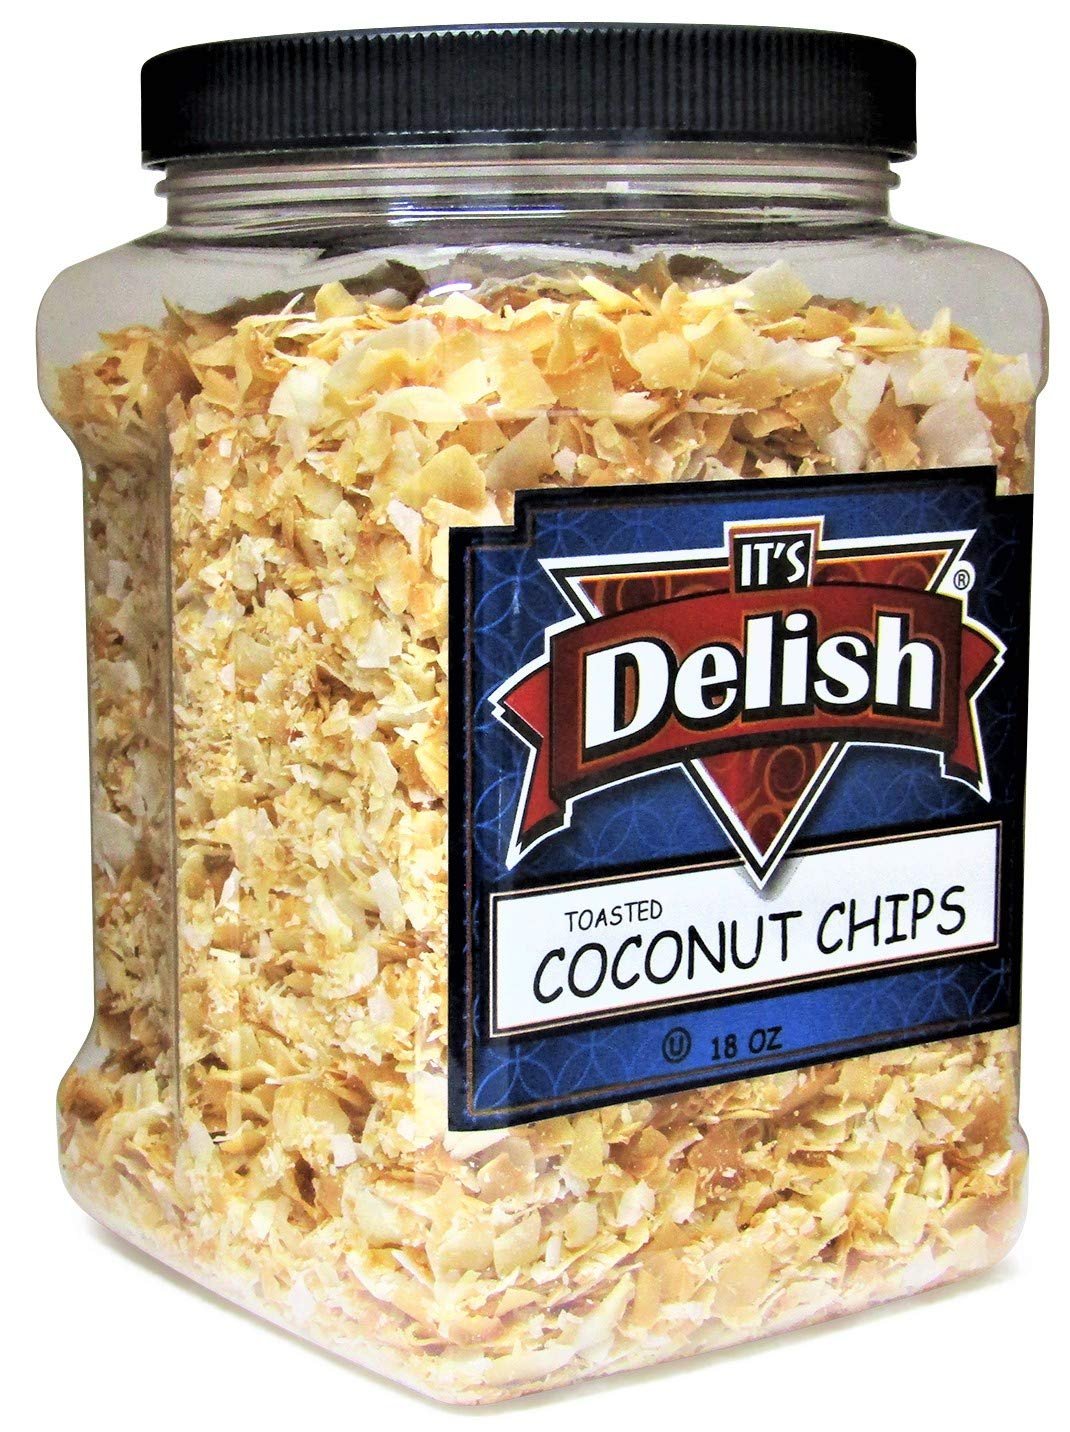 Gourmet Toasted Sweetened Coconut Chips by Its Delish – 18 oz Jumbo Reusable Container Jar – Healthy Creative Snacks Favorite Food Crunch – Great